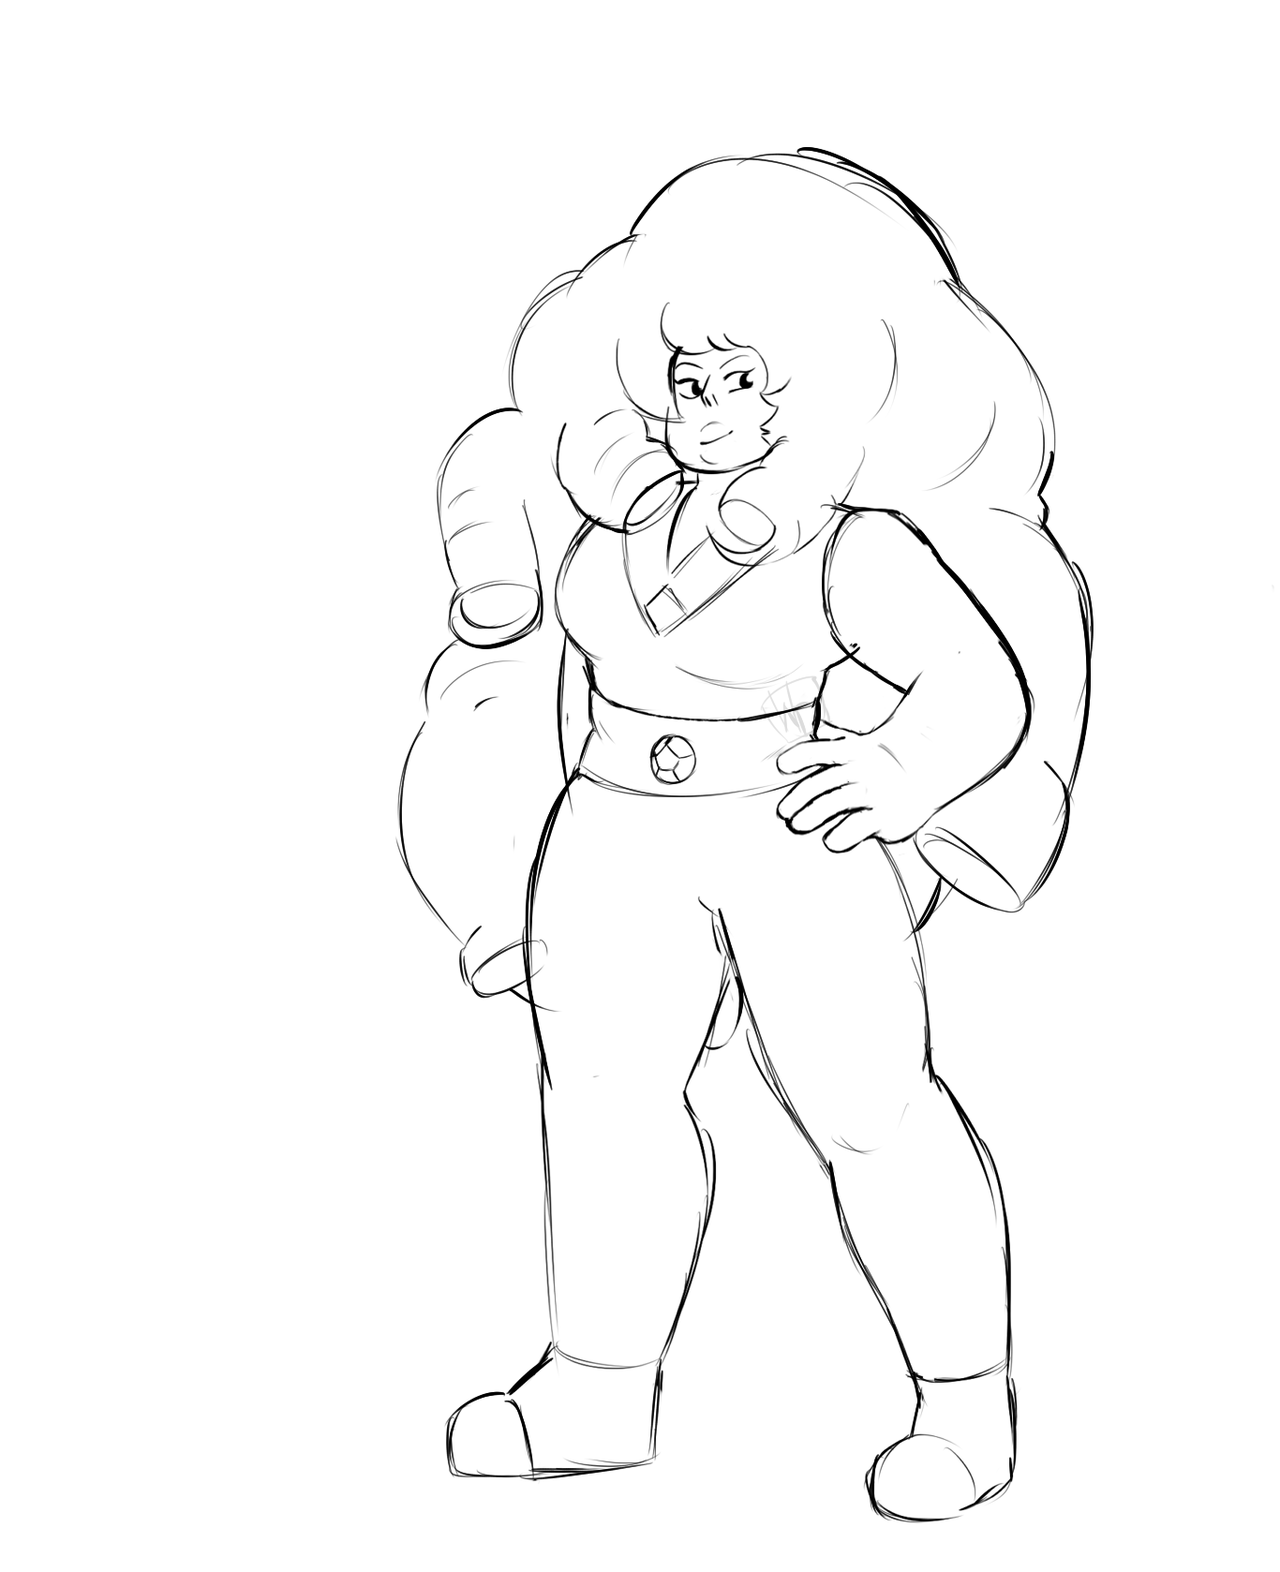 So how about those spoilers of how Homeworld Rose quartz *MIGHT* look like? :>c I seen the keyring post? and I think @hantabe might be right Pearl’s regen outfit isn’t in the sequence we seen and so...